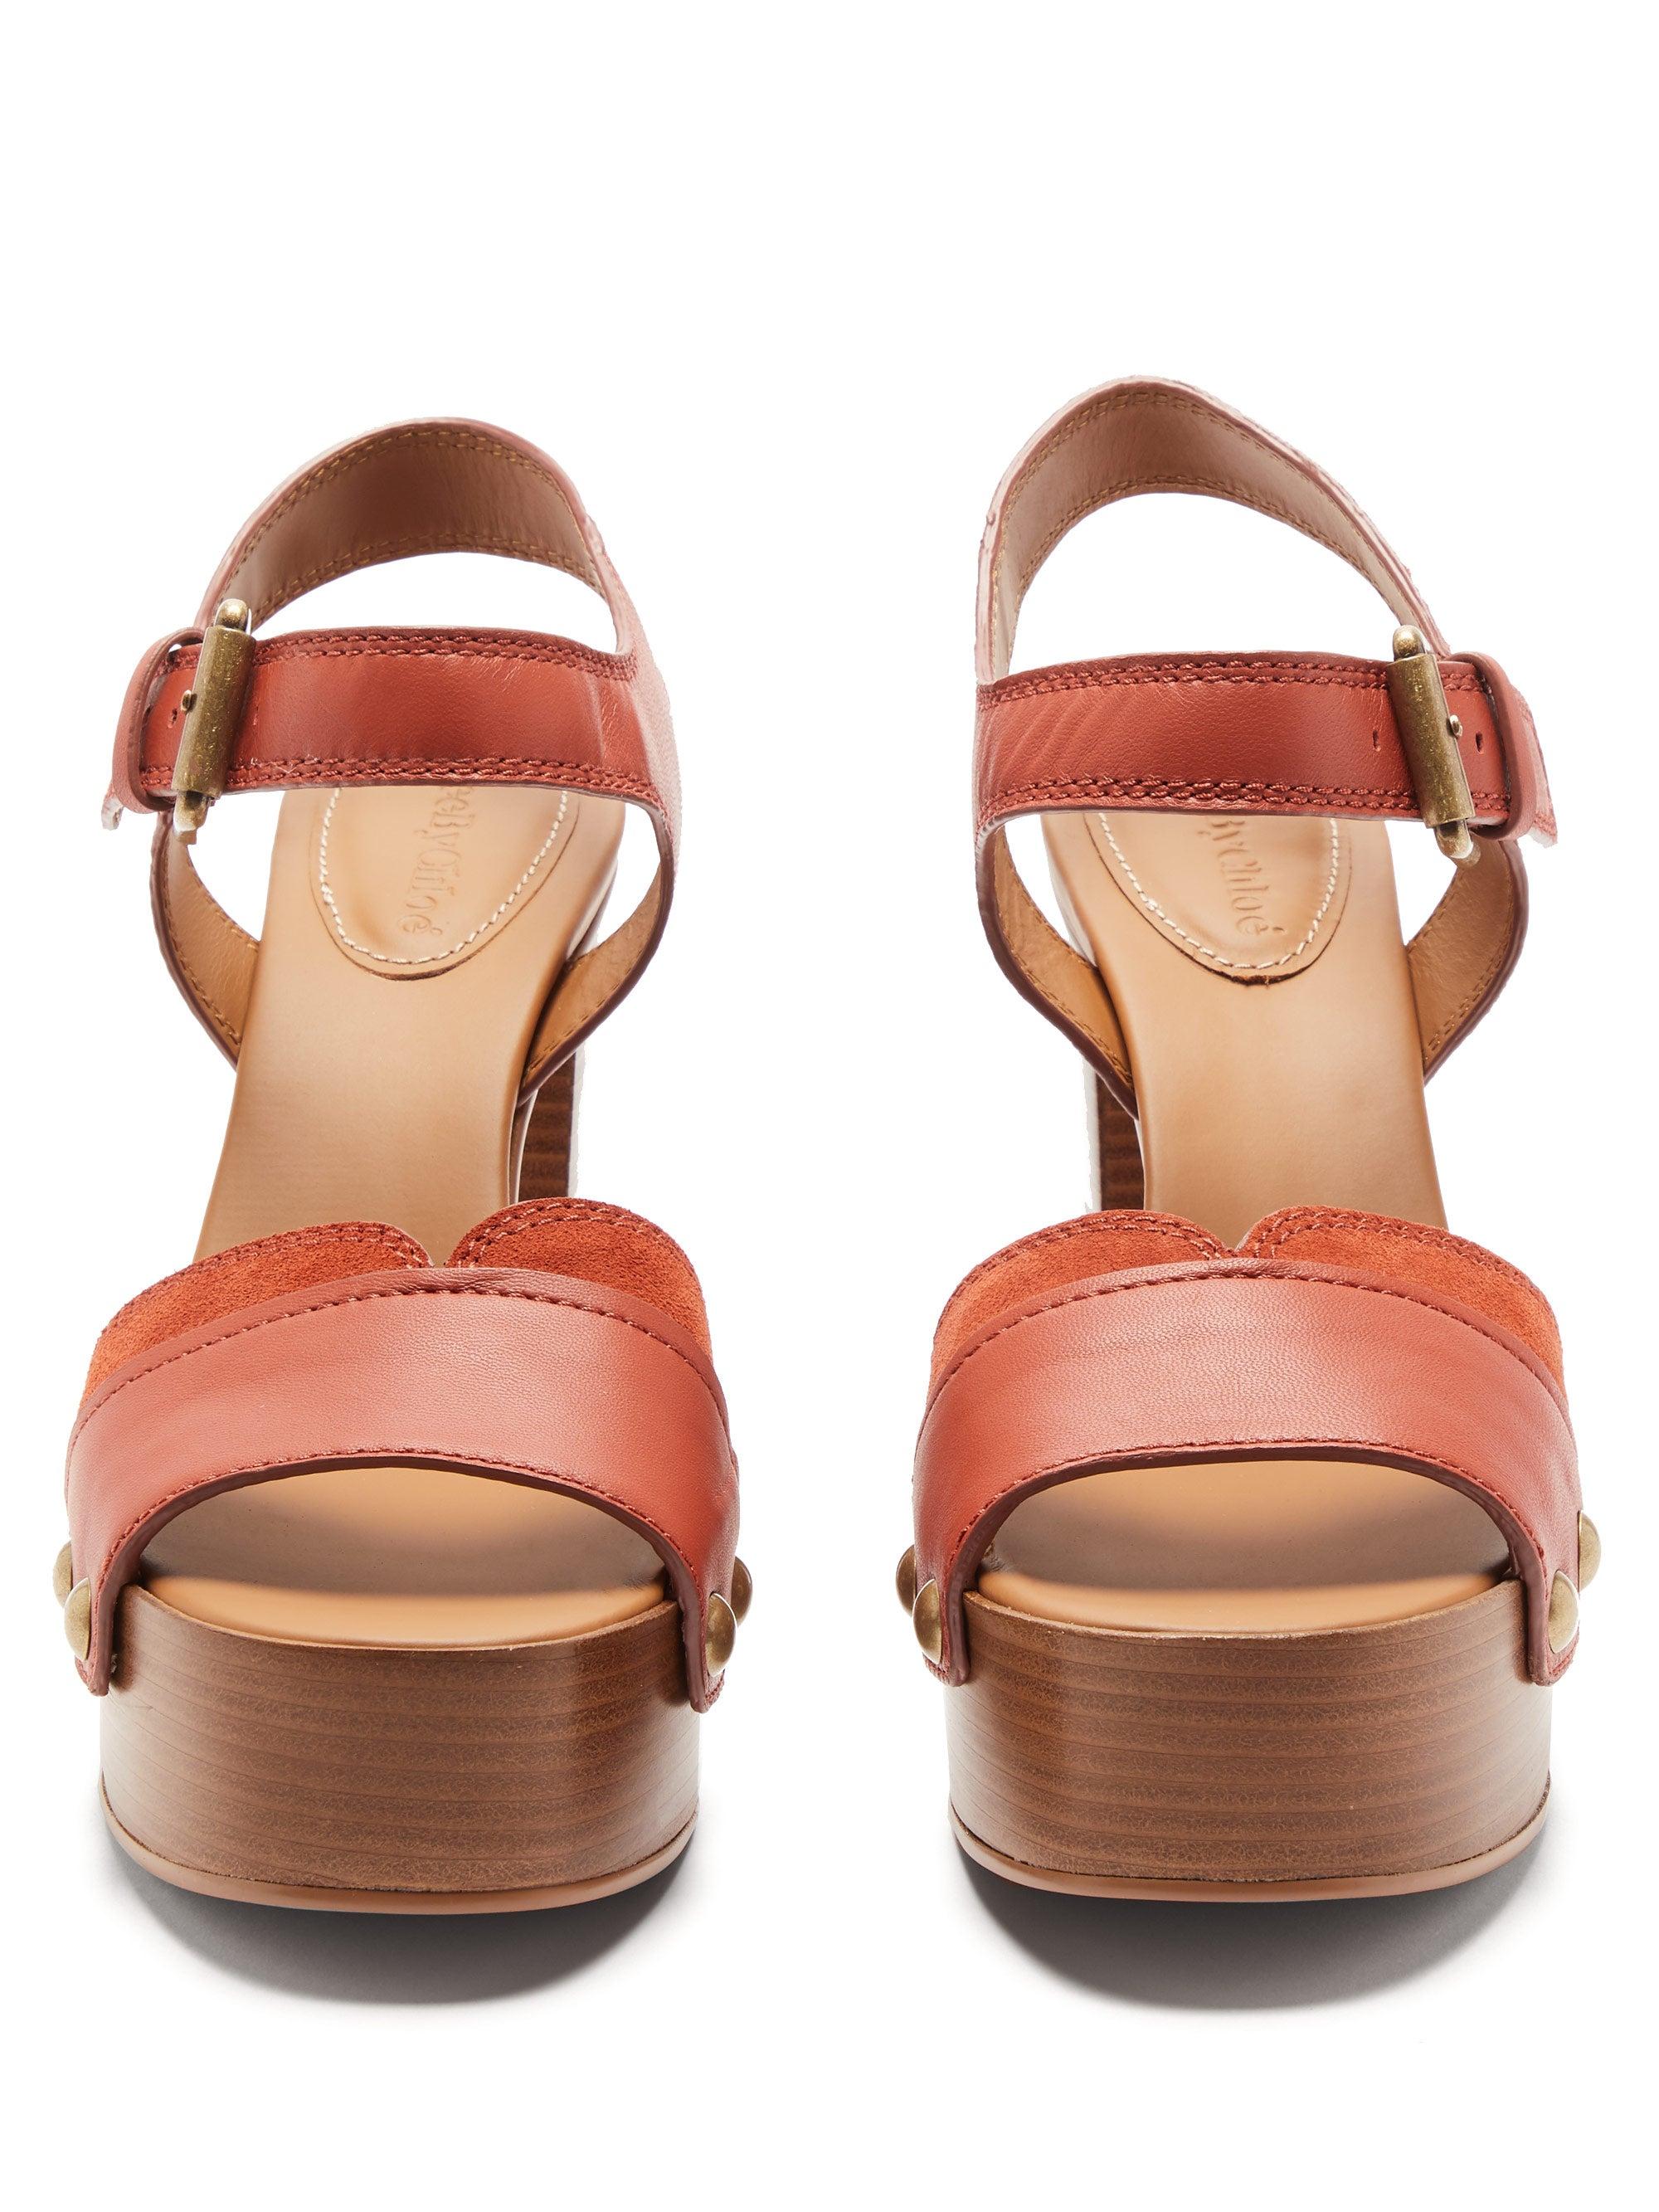 See By Chloé Studded Suede-trim Leather Platform Sandals in Orange - Lyst